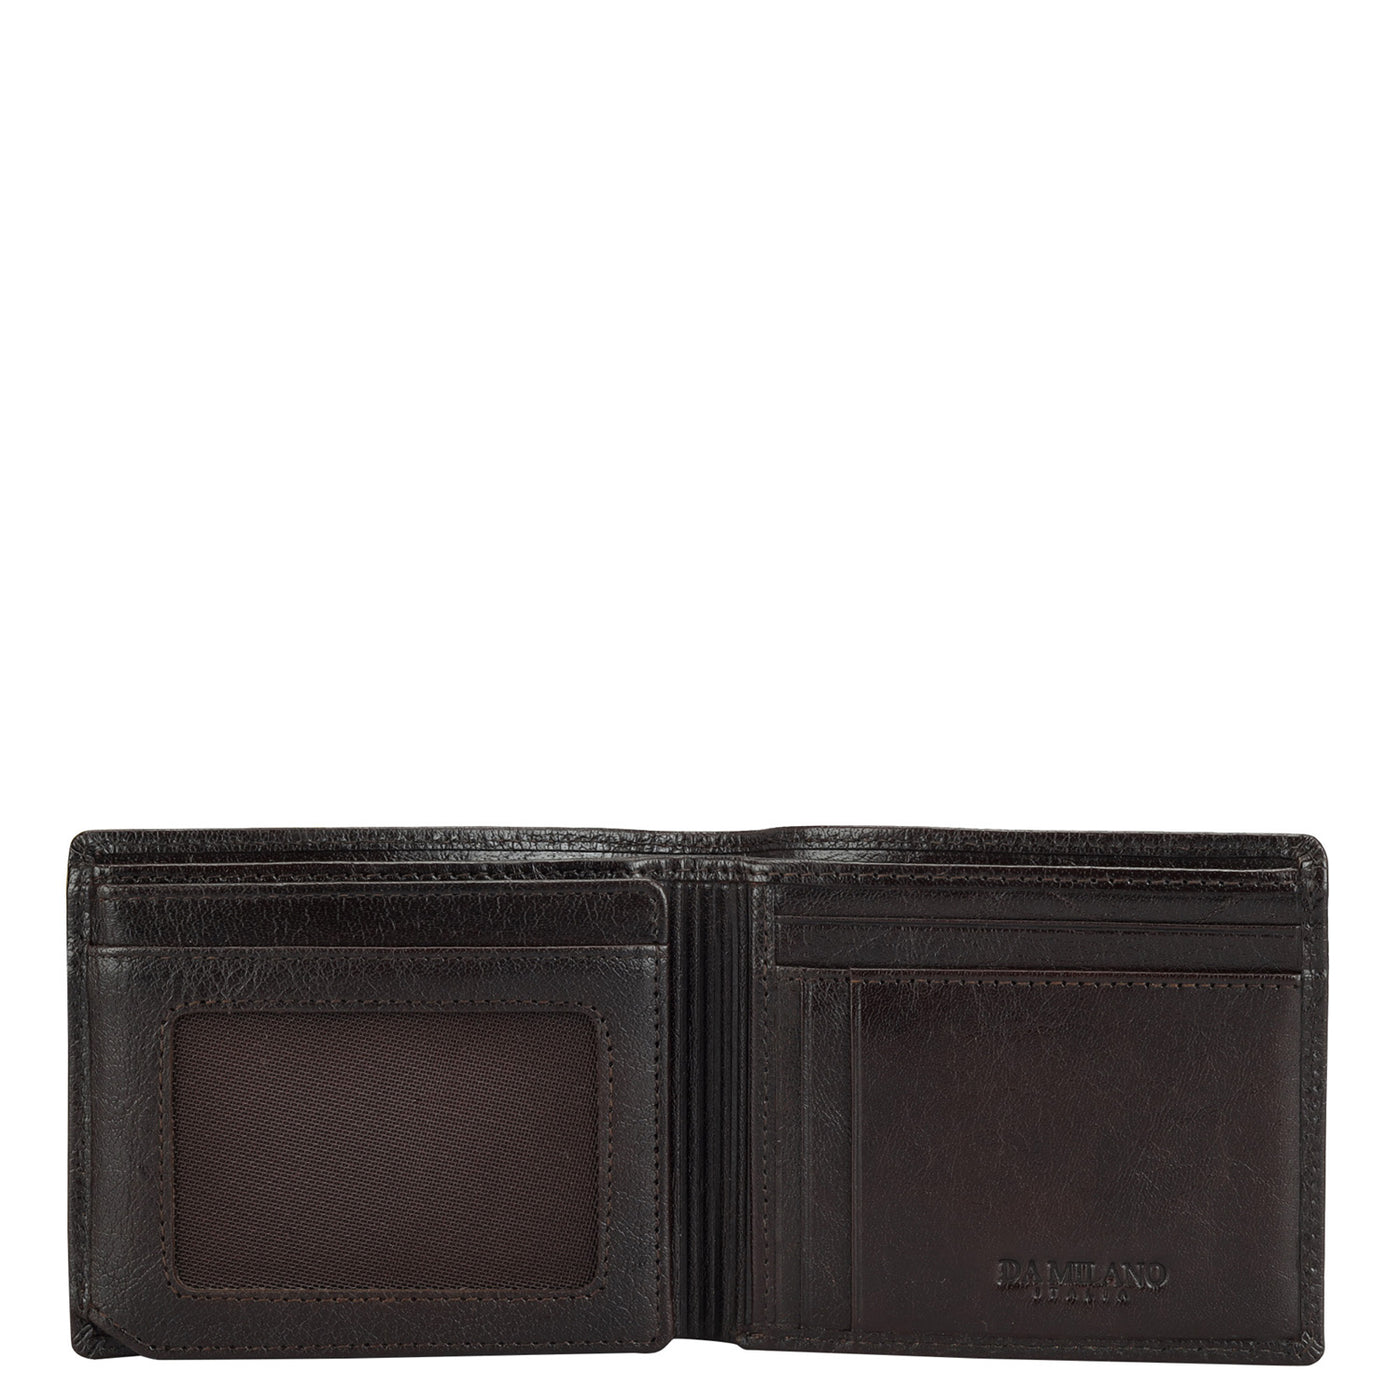 Elephant Pattern Leather Mens Wallet - Chocolate